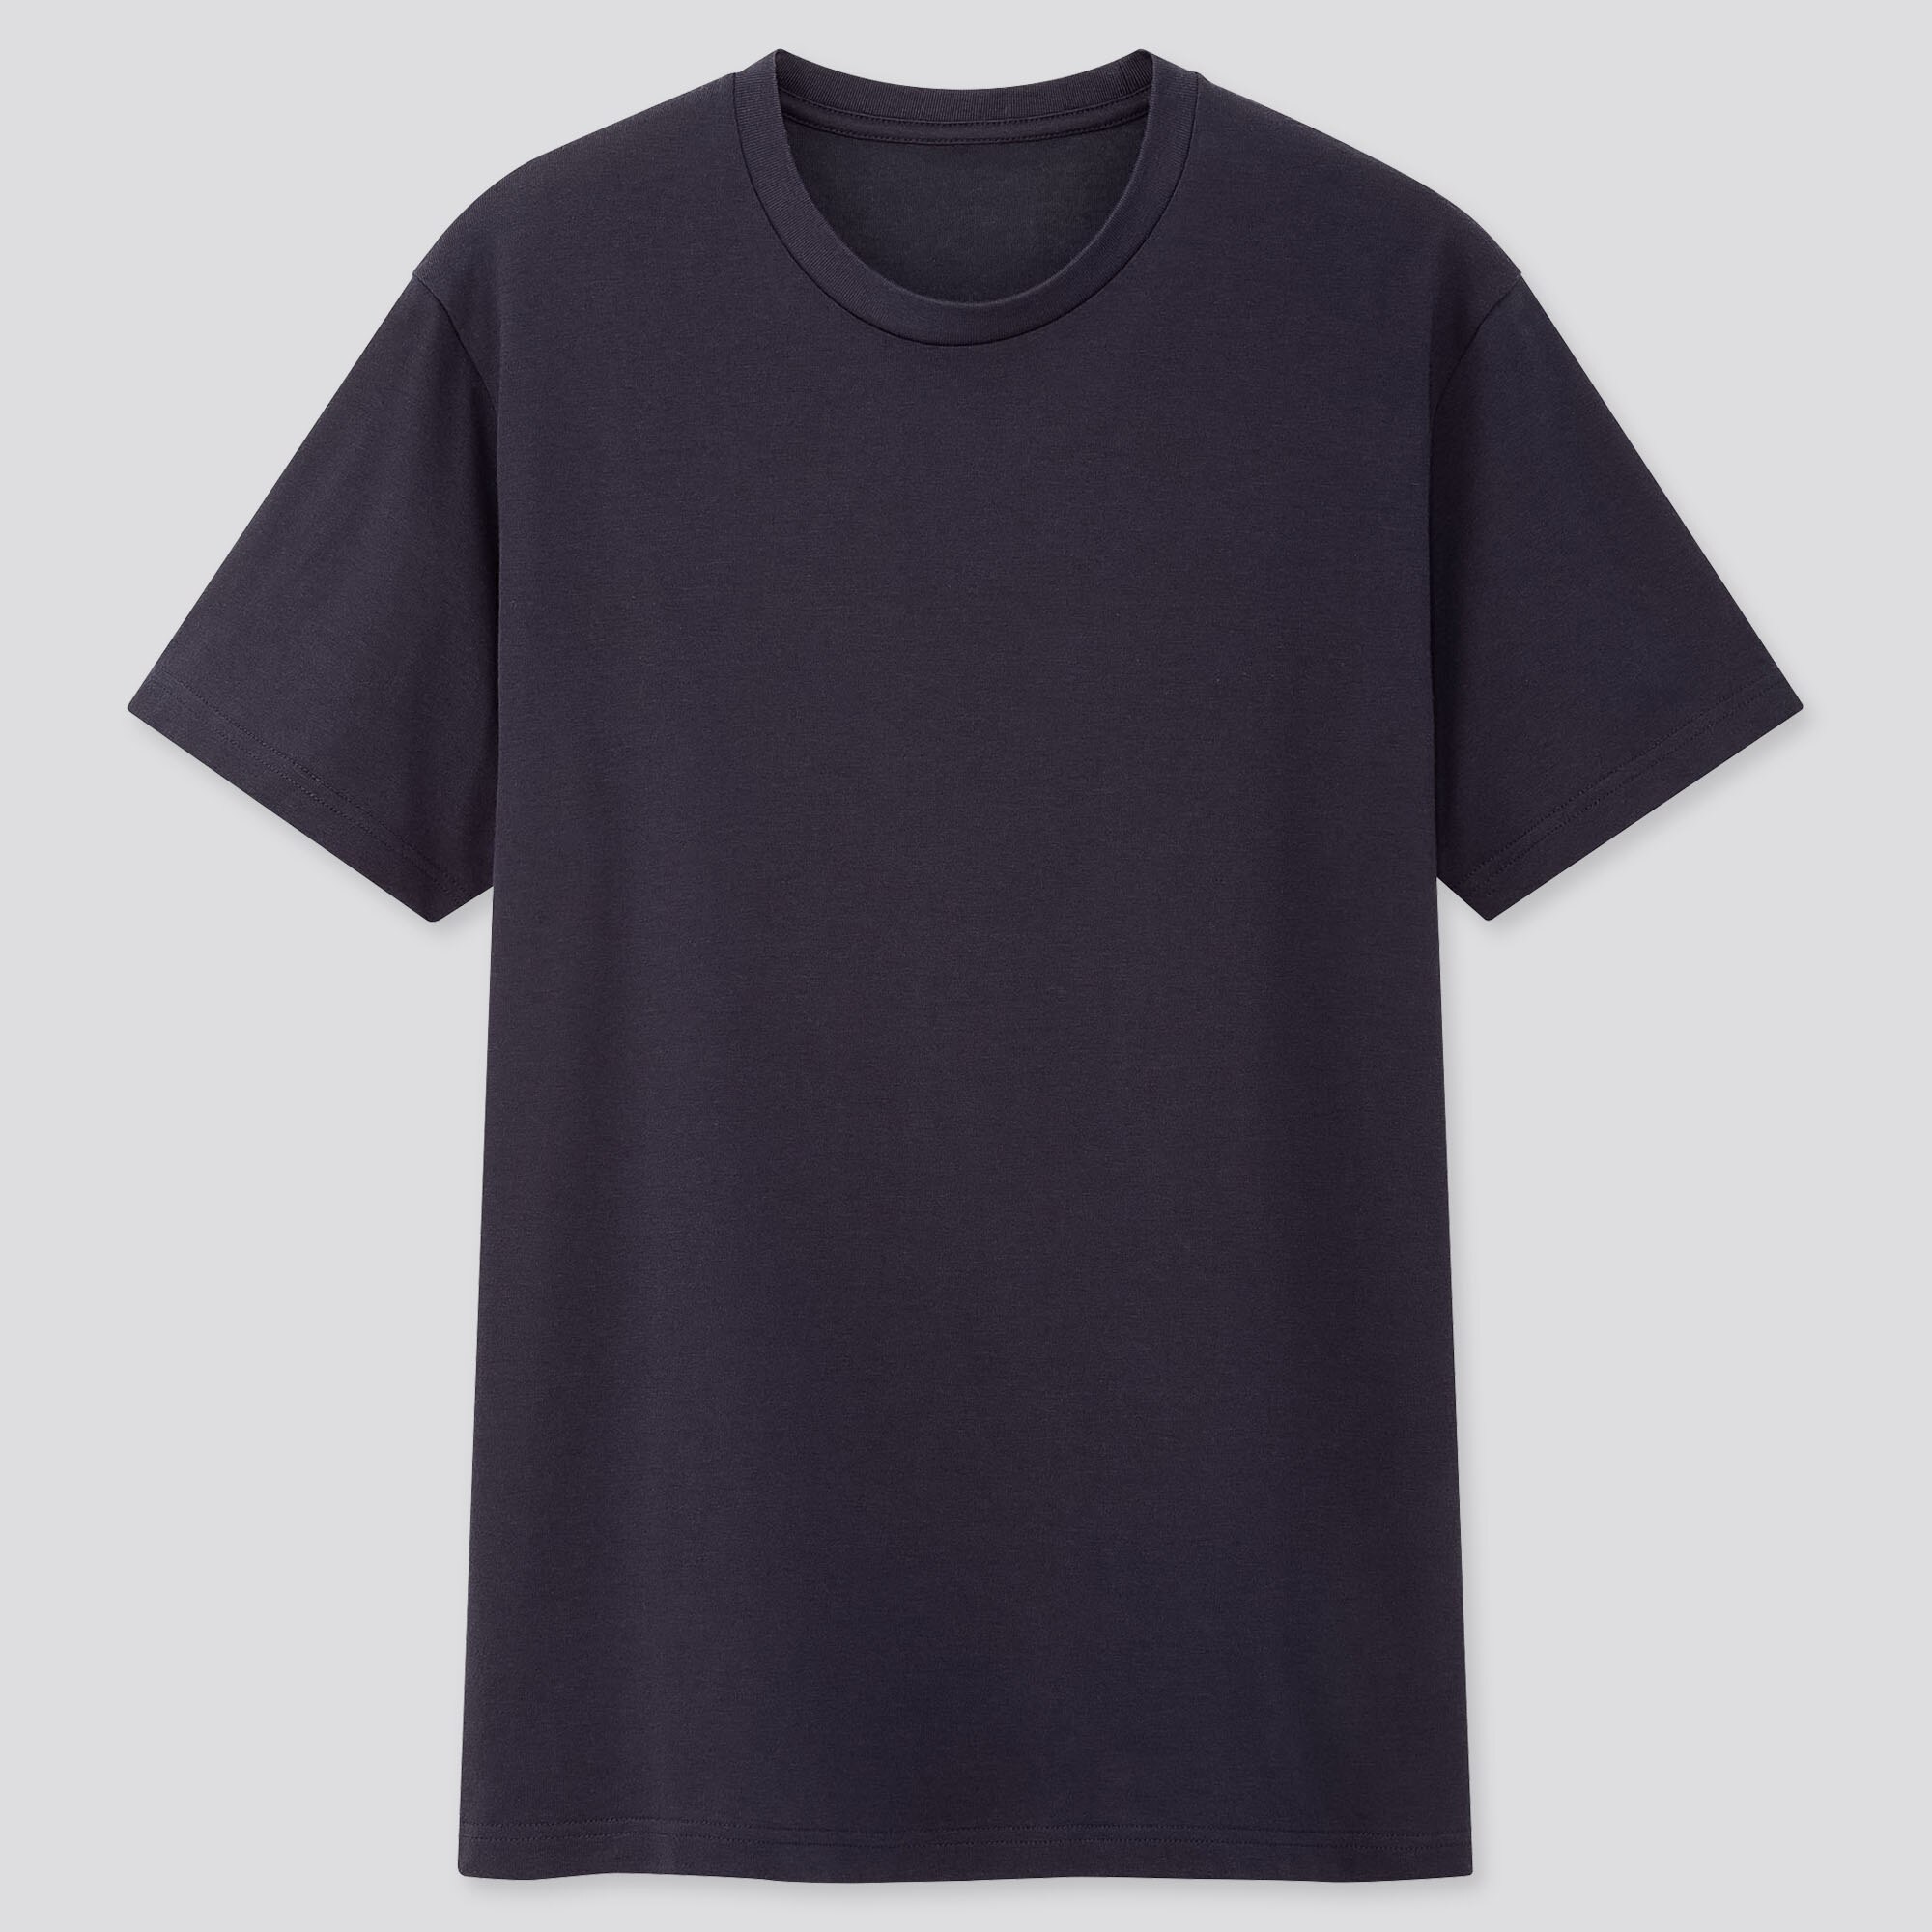 MEN PACKAGED DRY CREW NECK SHORT-SLEEVE T-SHIRT | UNIQLO US